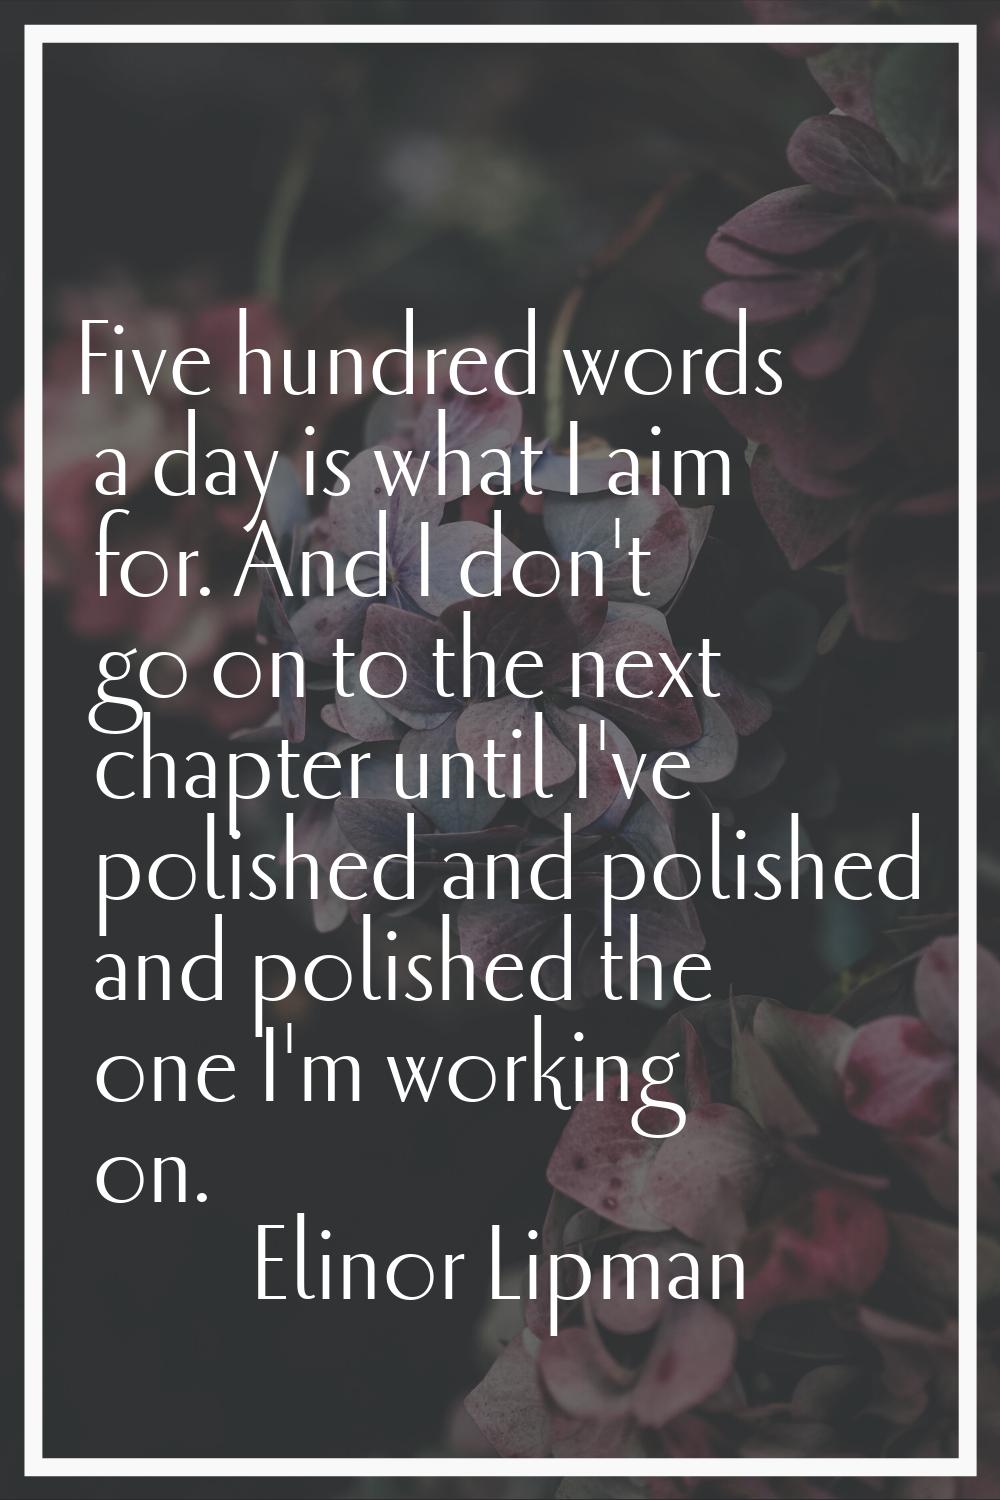 Five hundred words a day is what I aim for. And I don't go on to the next chapter until I've polish